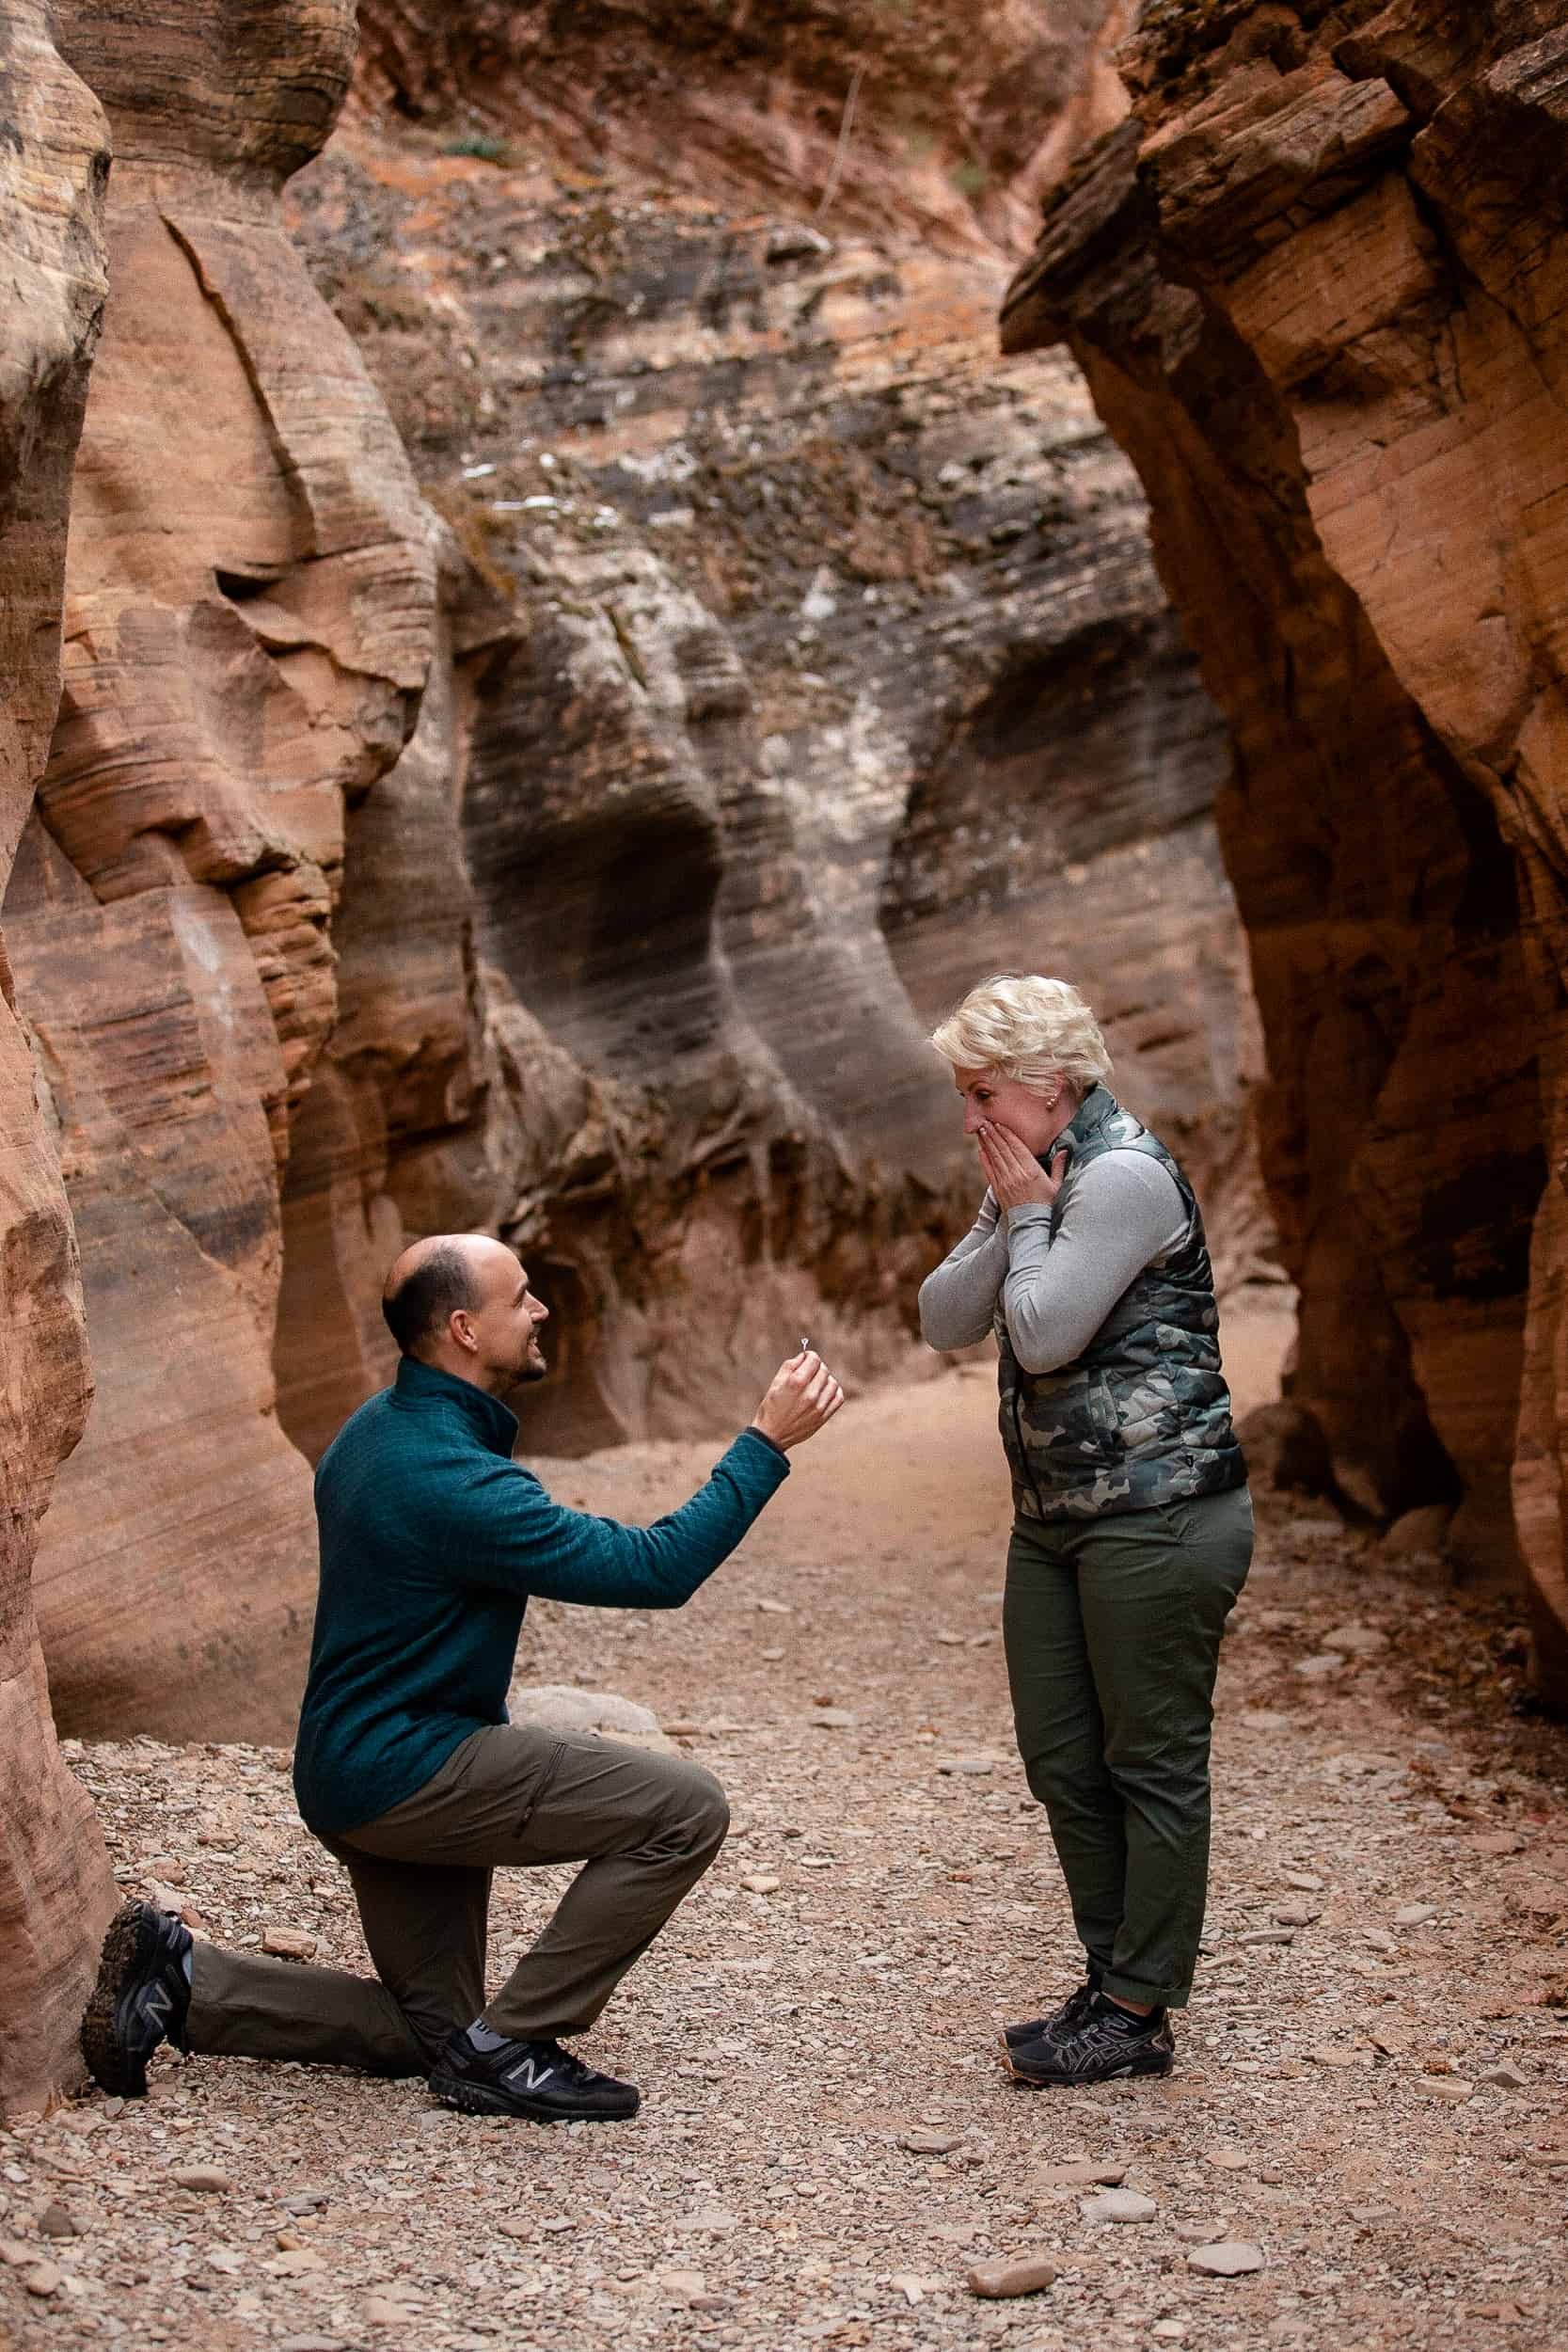 Surprise Proposal in a slot canyon in Utah